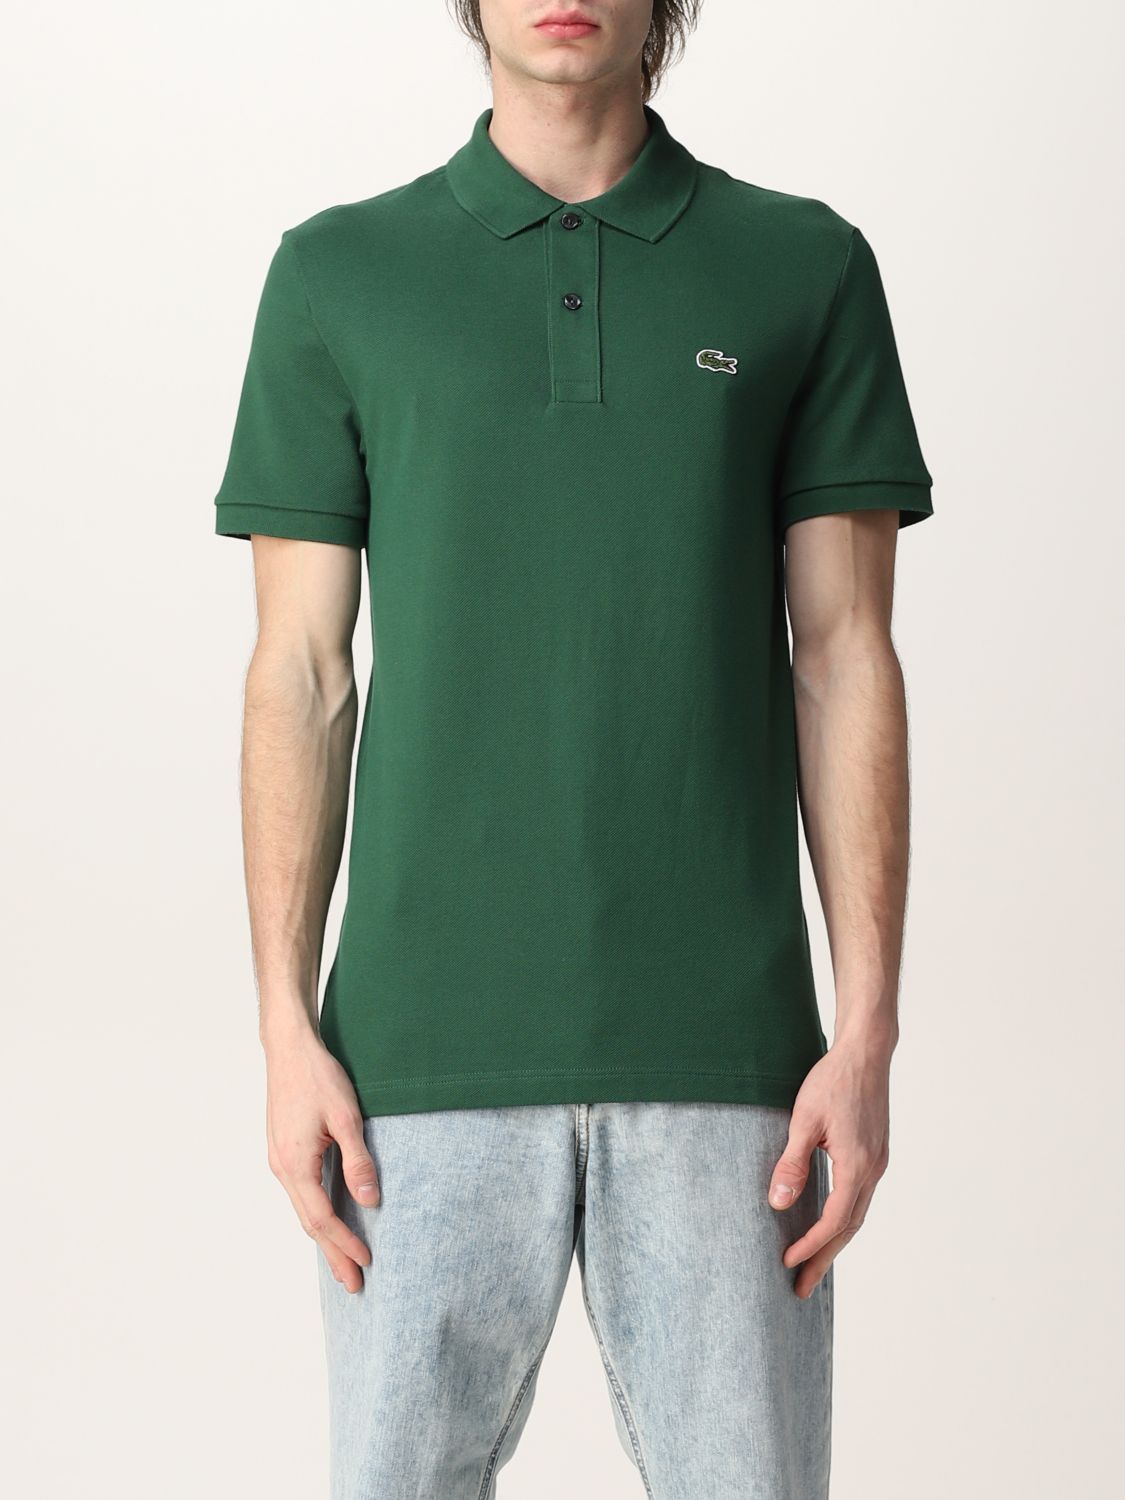 Lacoste Outlet: basic polo shirt with logo - Green | Lacoste shirt PH4012 online on GIGLIO.COM